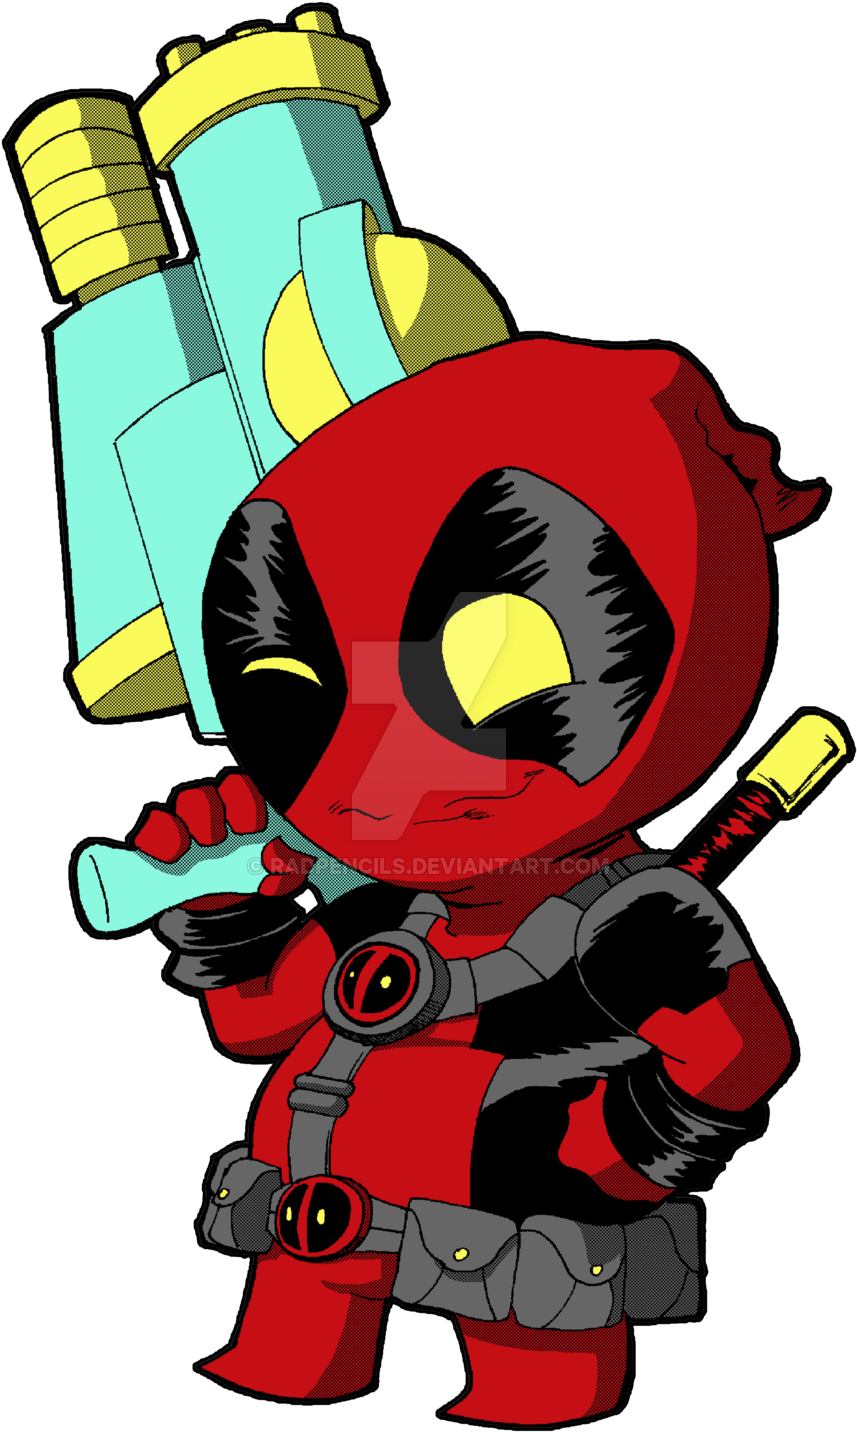 Download Deadpool Drawing Marvel Comics Superhero Comic Book - Deadpool  Baby Cartoon Illustration PNG Image with No Background 